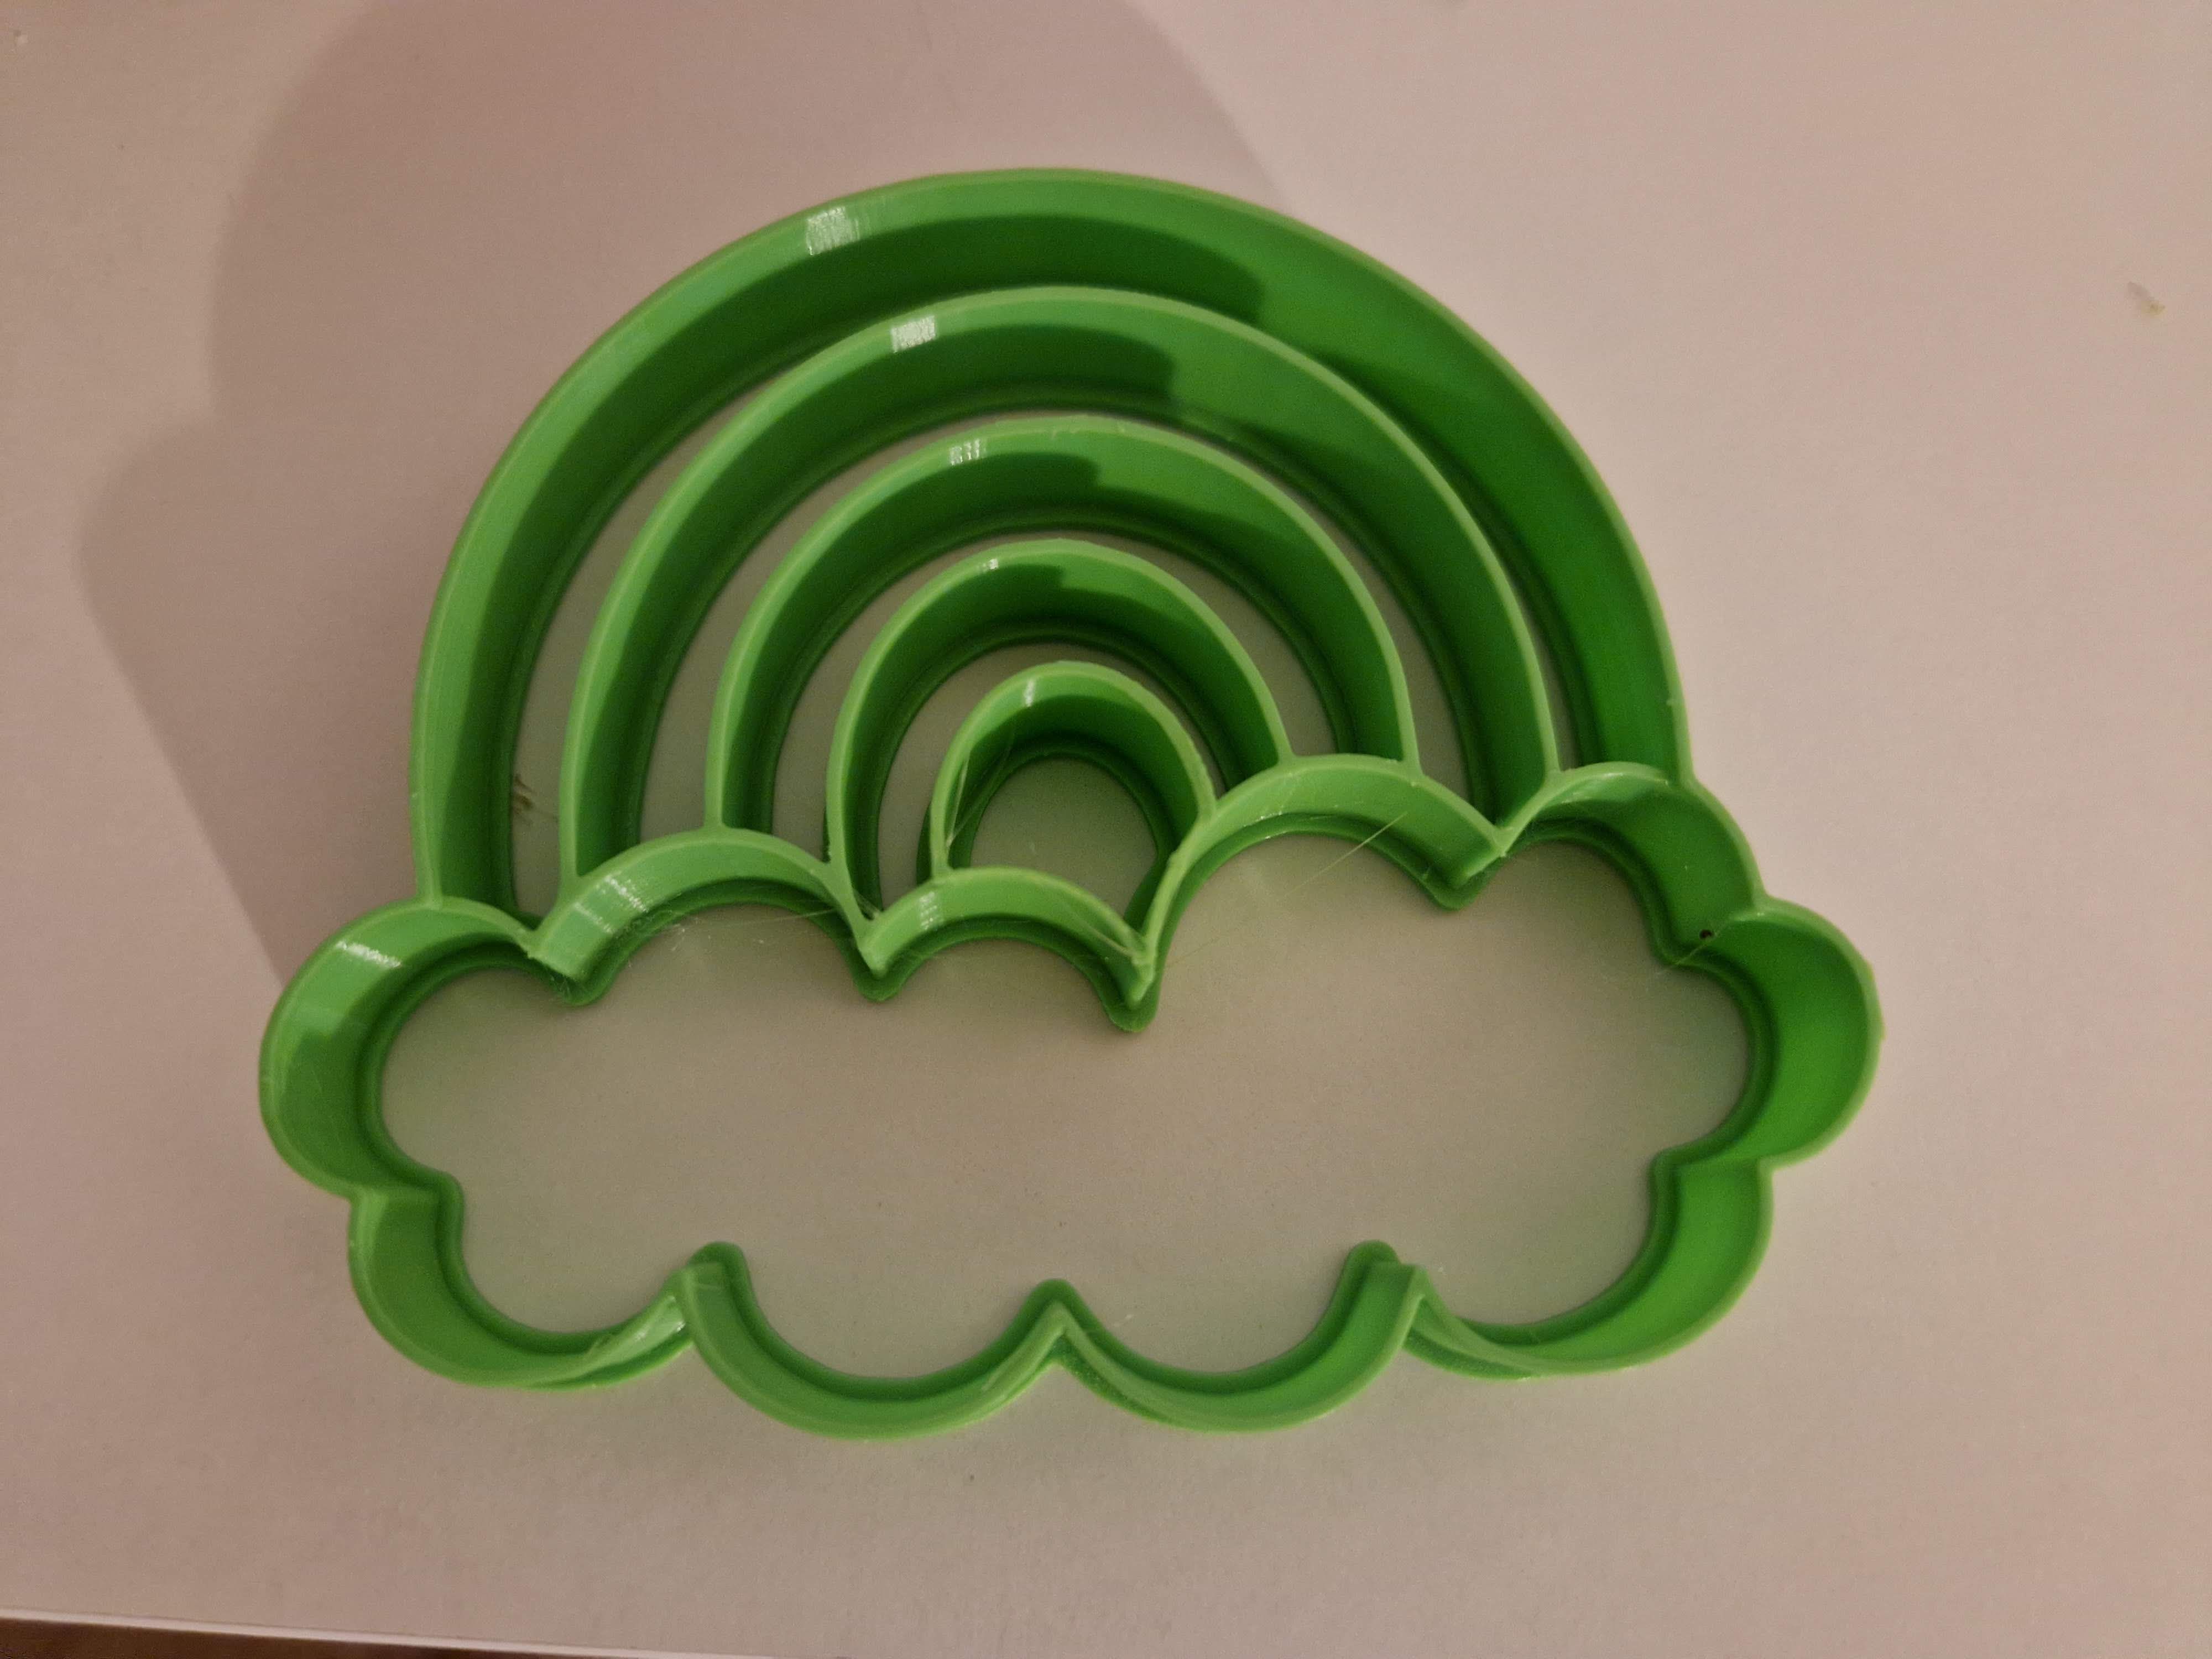 Cookie cutter in the shape of a rainbow